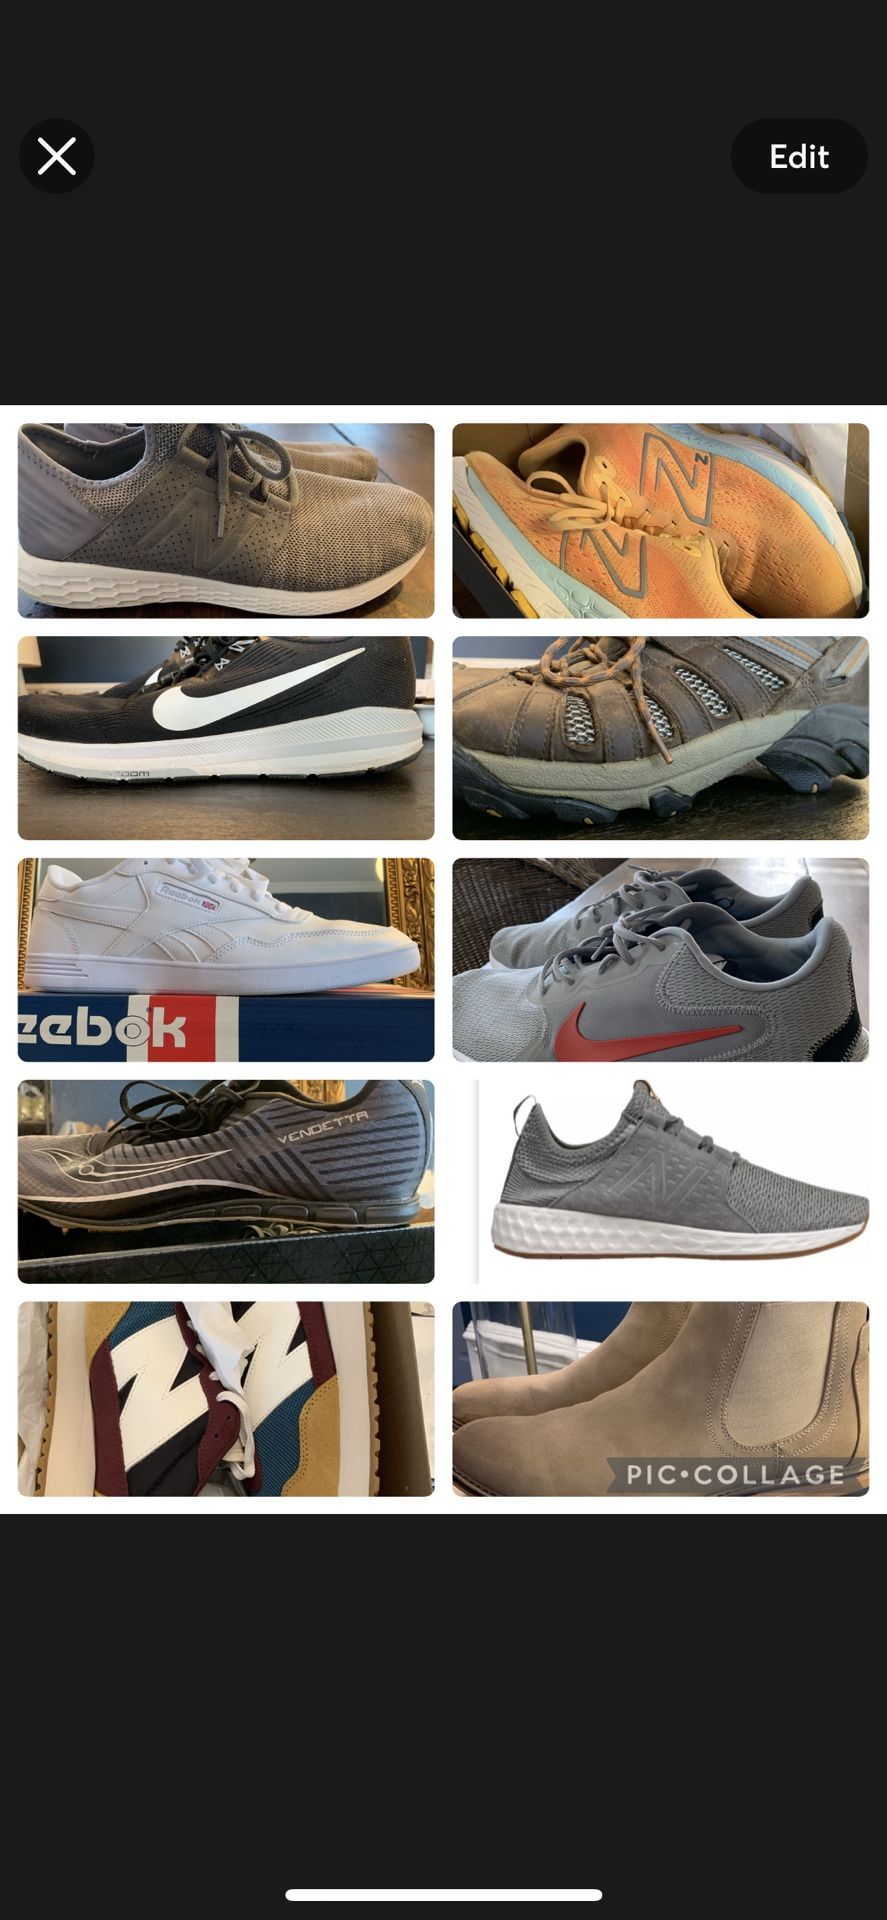 Various New/Like New Mens Shoes Sneakers Boots size 9-15 Nike New Balance Reebok Keen Madden Saucony